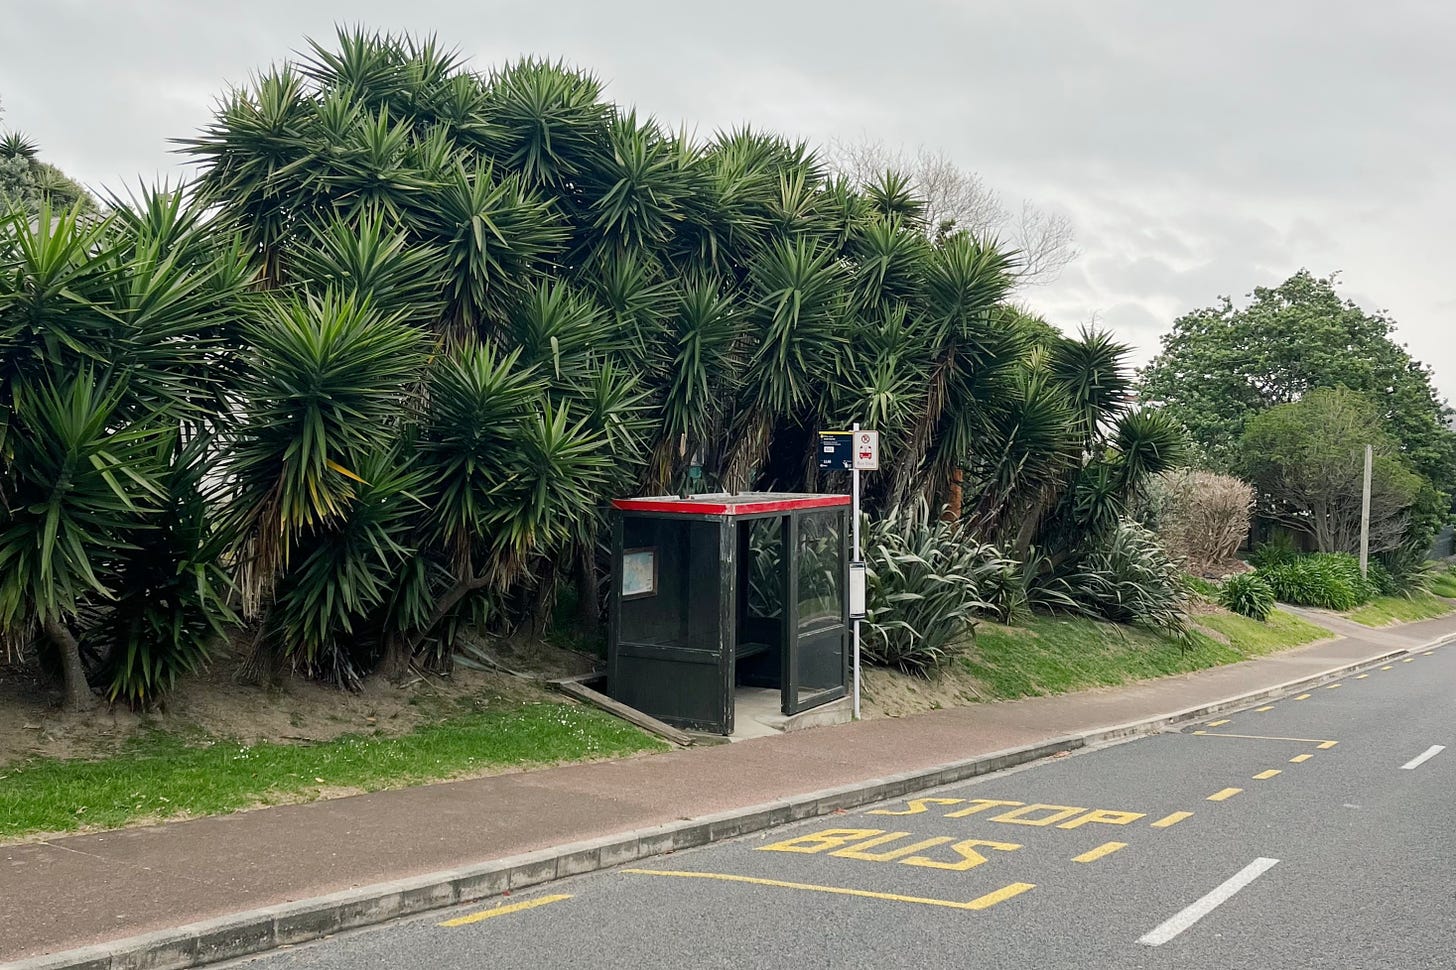 A photograph of a bus shelter, painted dark green with a red roof. In the foreground is a painted road with large-lettered BUS STOP and in the background is a line of spiky cabbage tree palms. A seam of grey sky is visible behind the trees